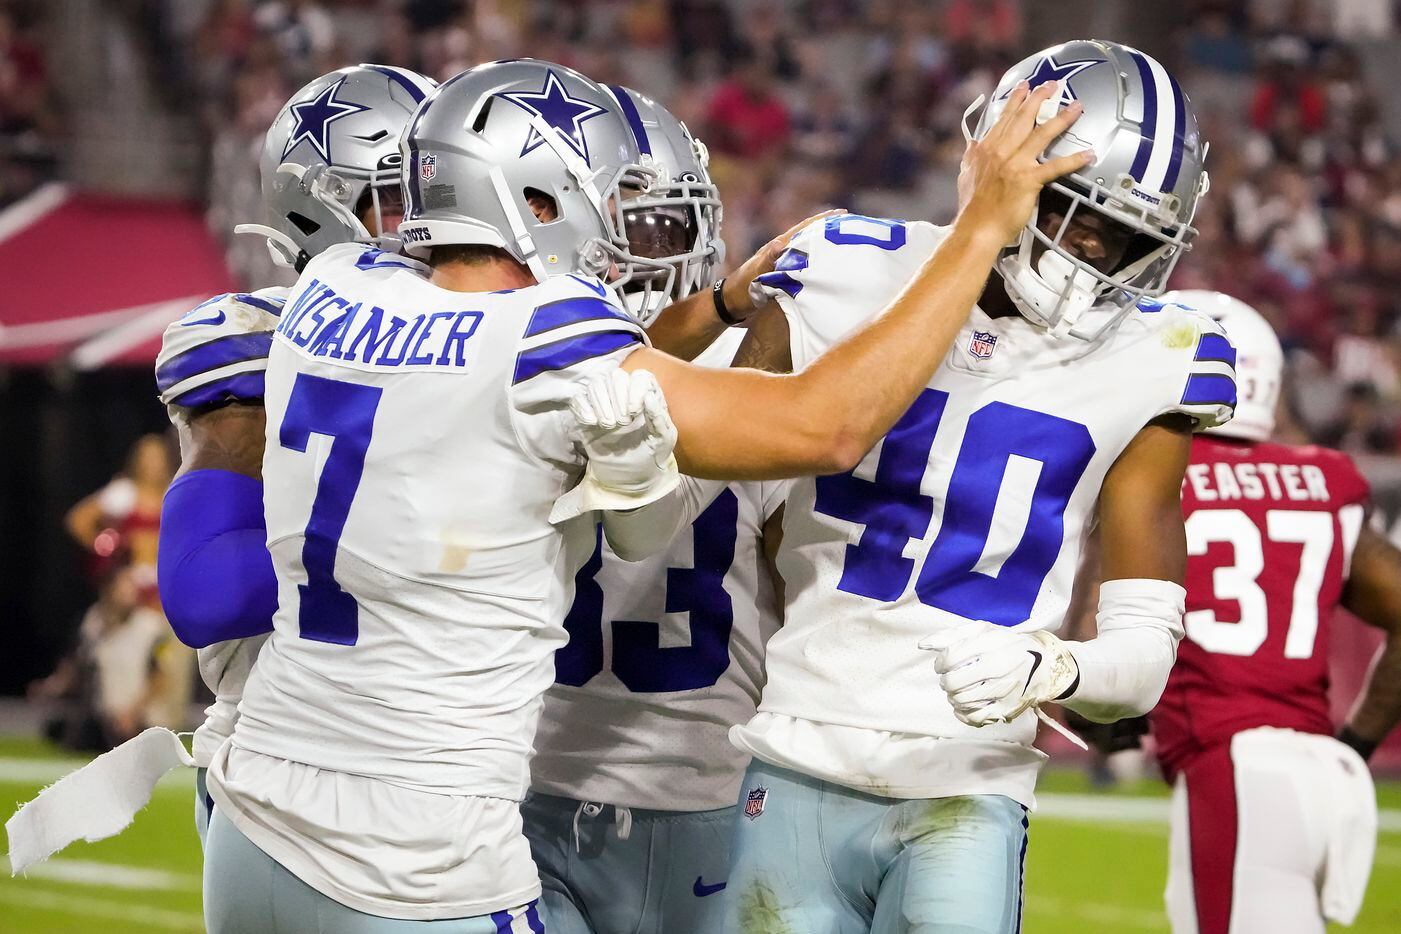 Dallas Cowboys cornerback Nahshon Wright (40) celebrates with punter Hunter Niswander (7) after making a stop on kick coverage during the second half of a preseason NFL football game against the Arizona Cardinals at State Farm Stadium on Friday, Aug. 13, 2021, in Glendale, Ariz.